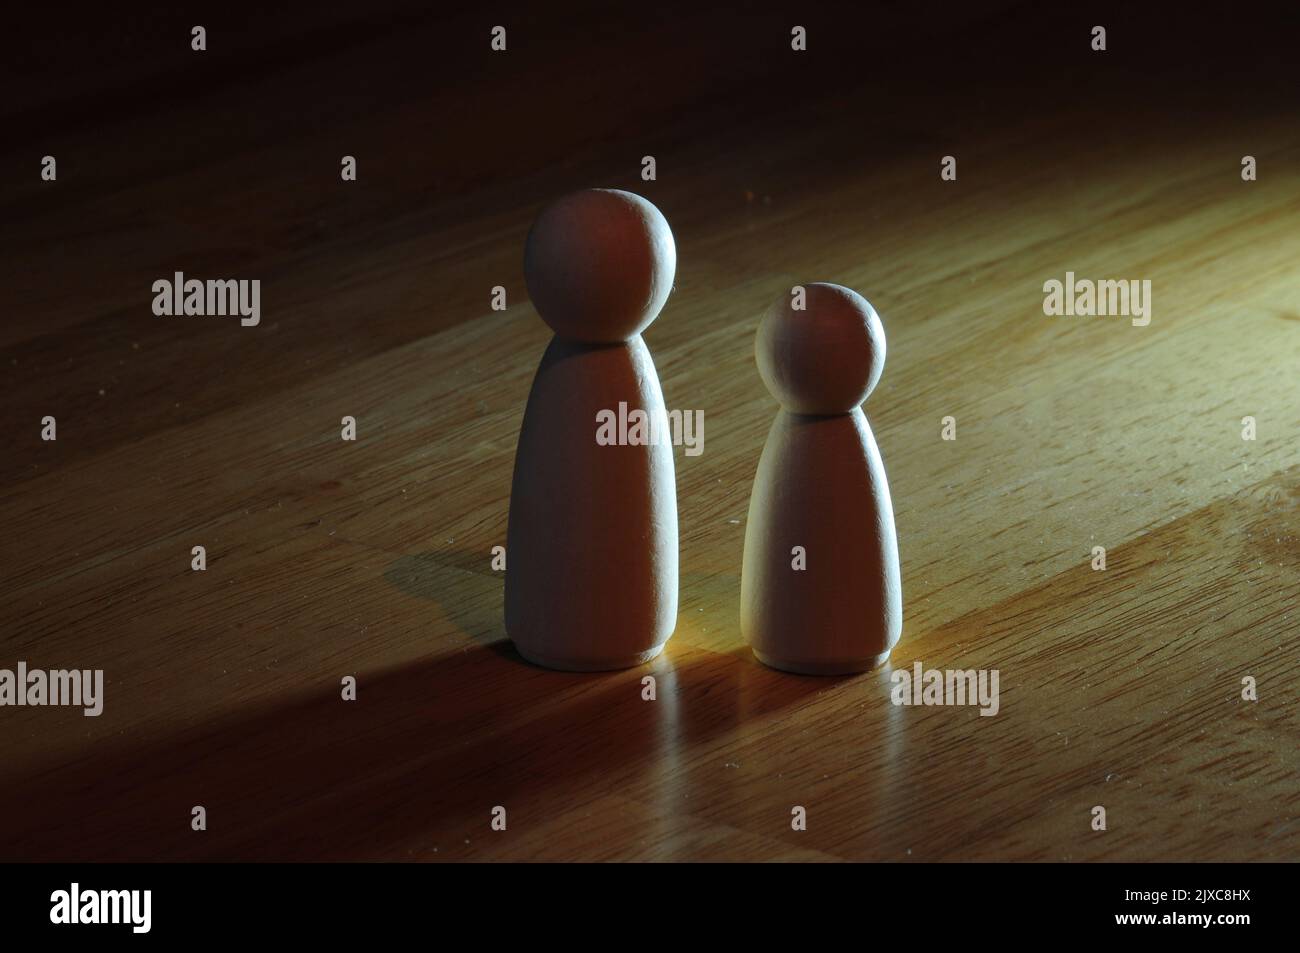 Wooden toy figures or skittles Stock Photo